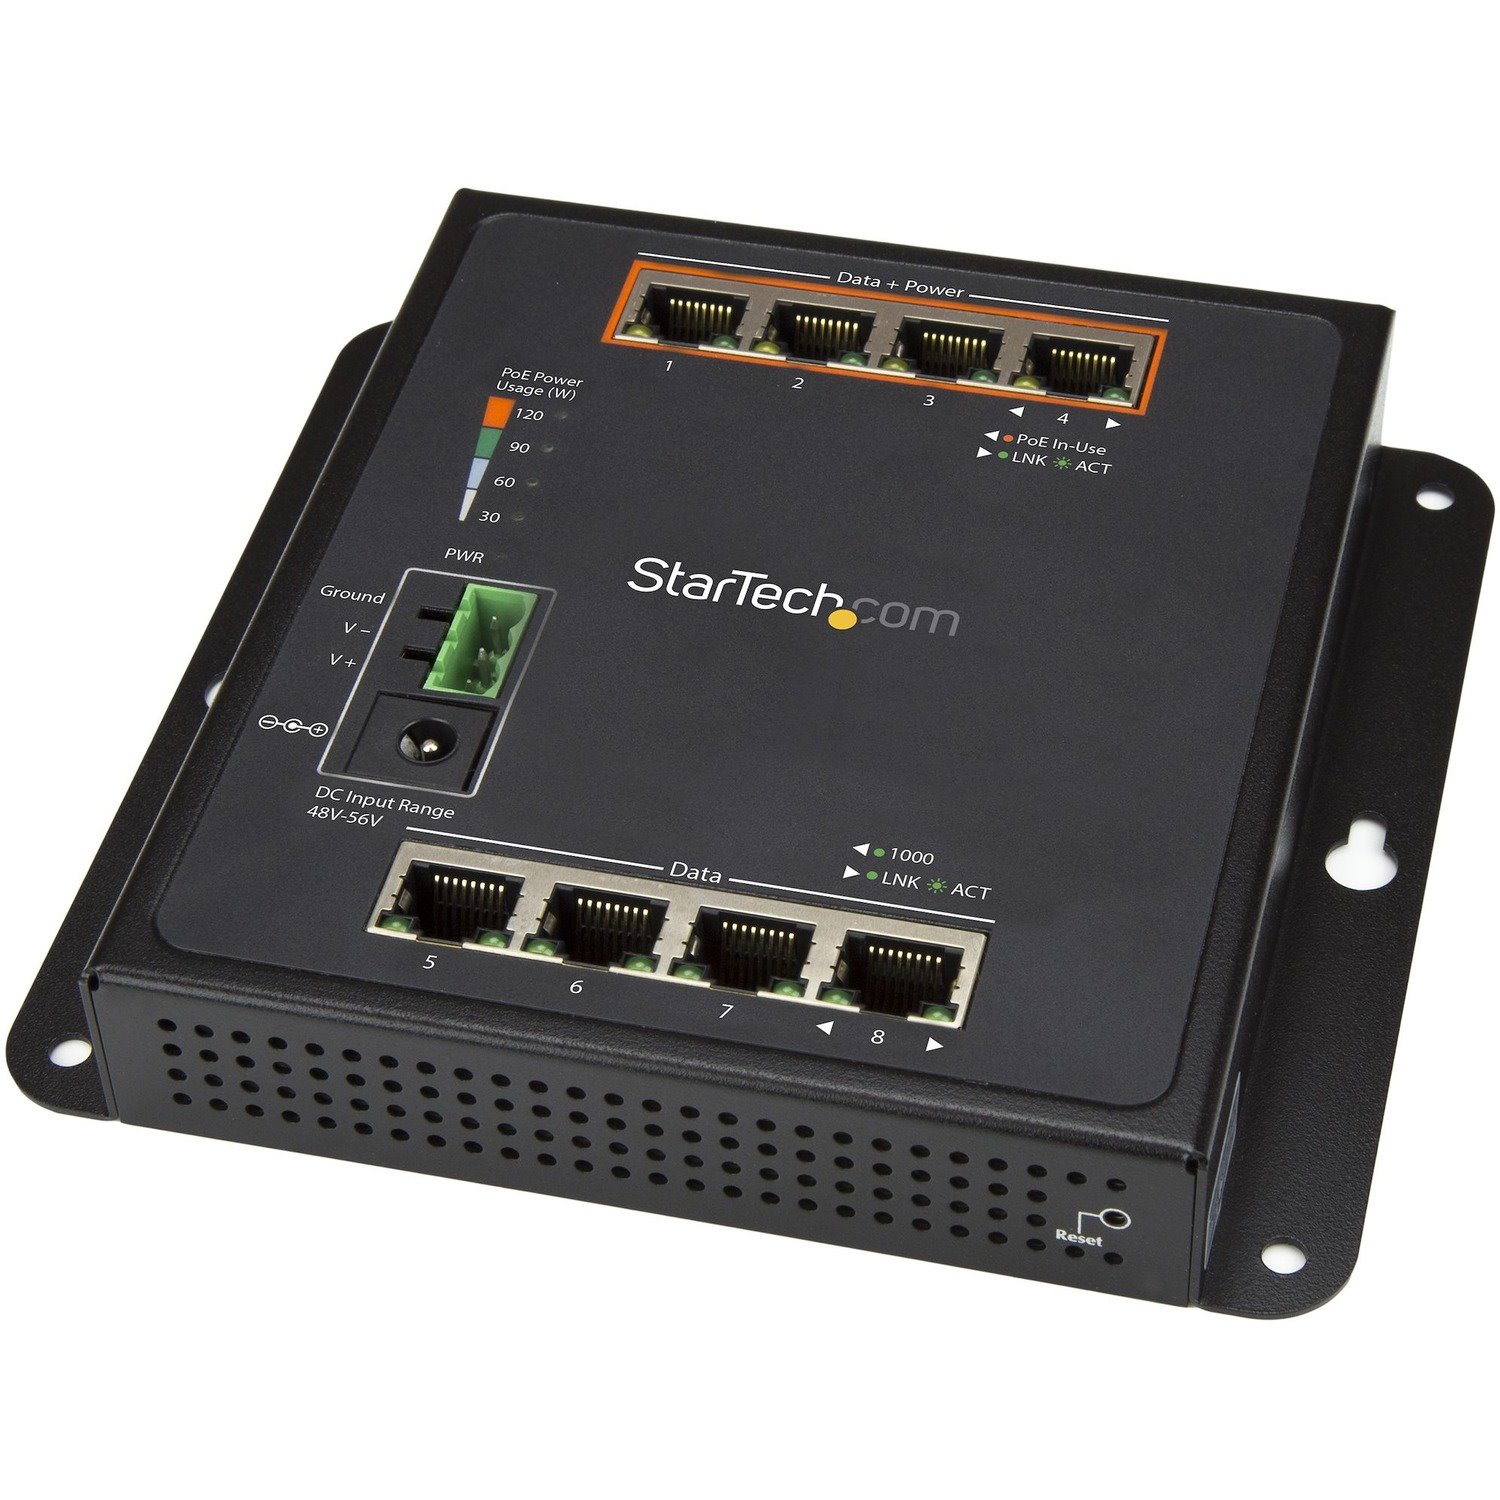 StarTech.com 8-Port (4 PoE+) Gigabit Ethernet Switch - Managed - Wall Mount with Front Access